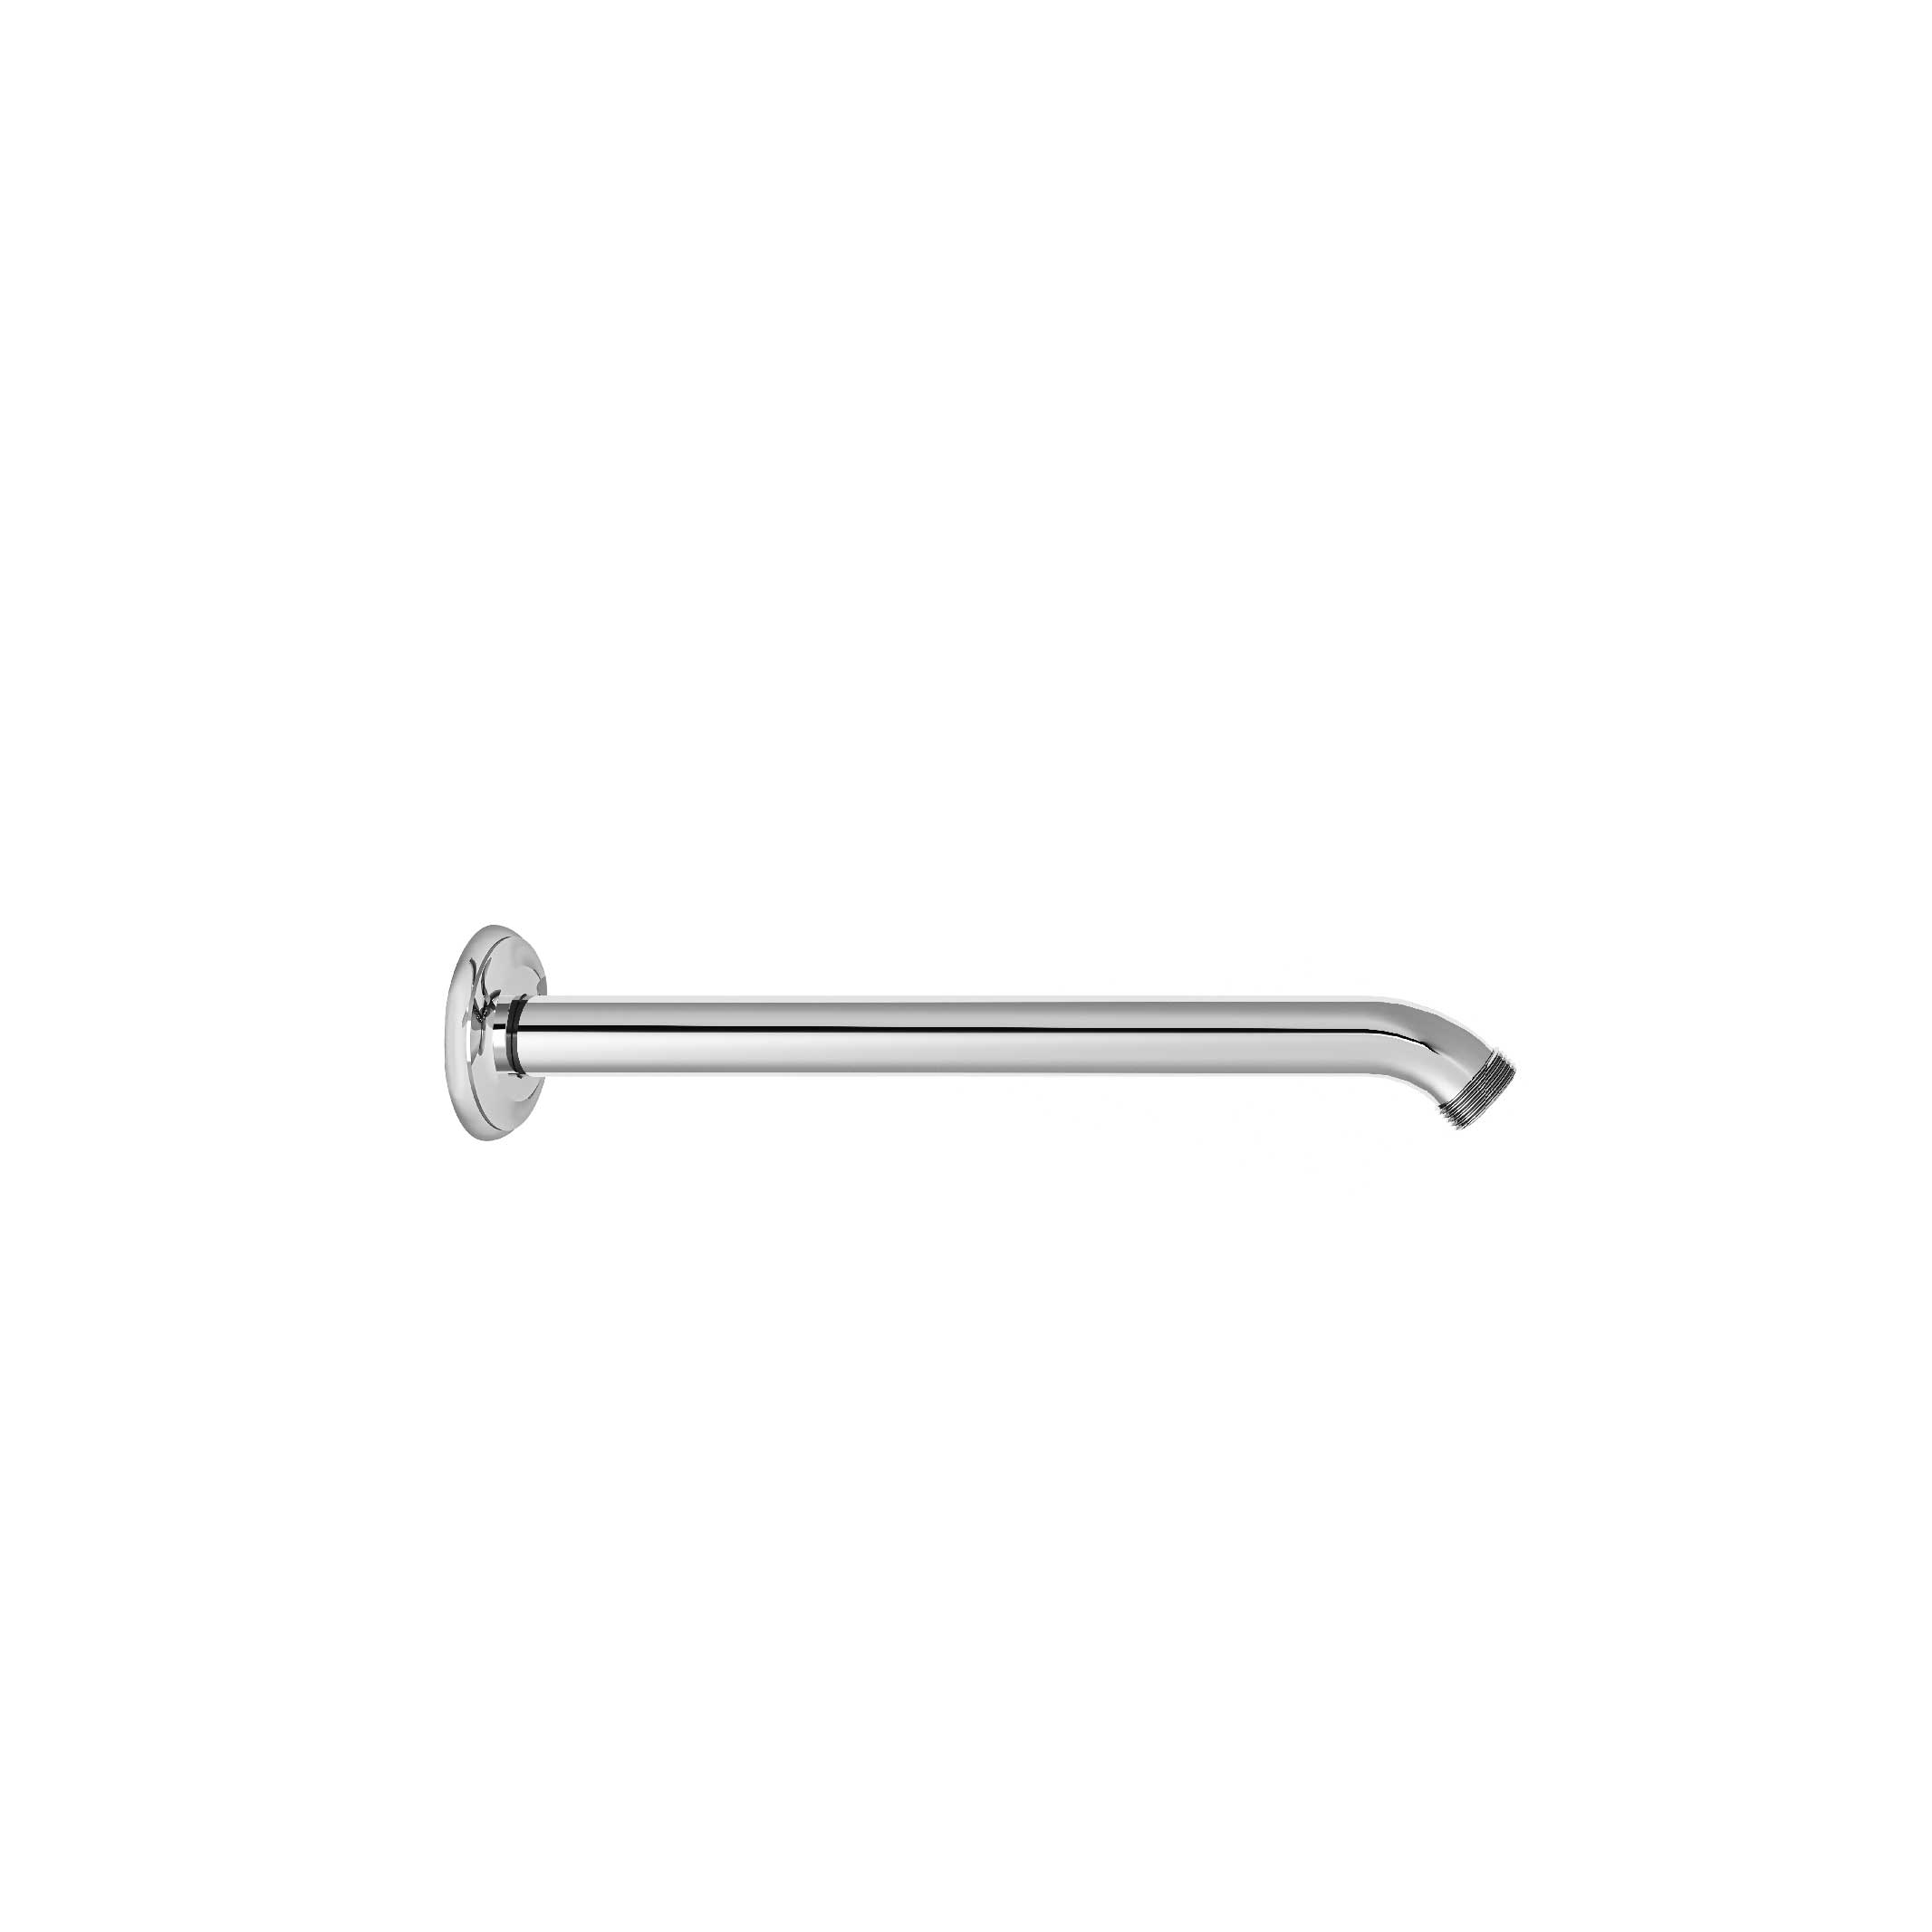 M40-2W170 Wall mounted shower arm 170mm